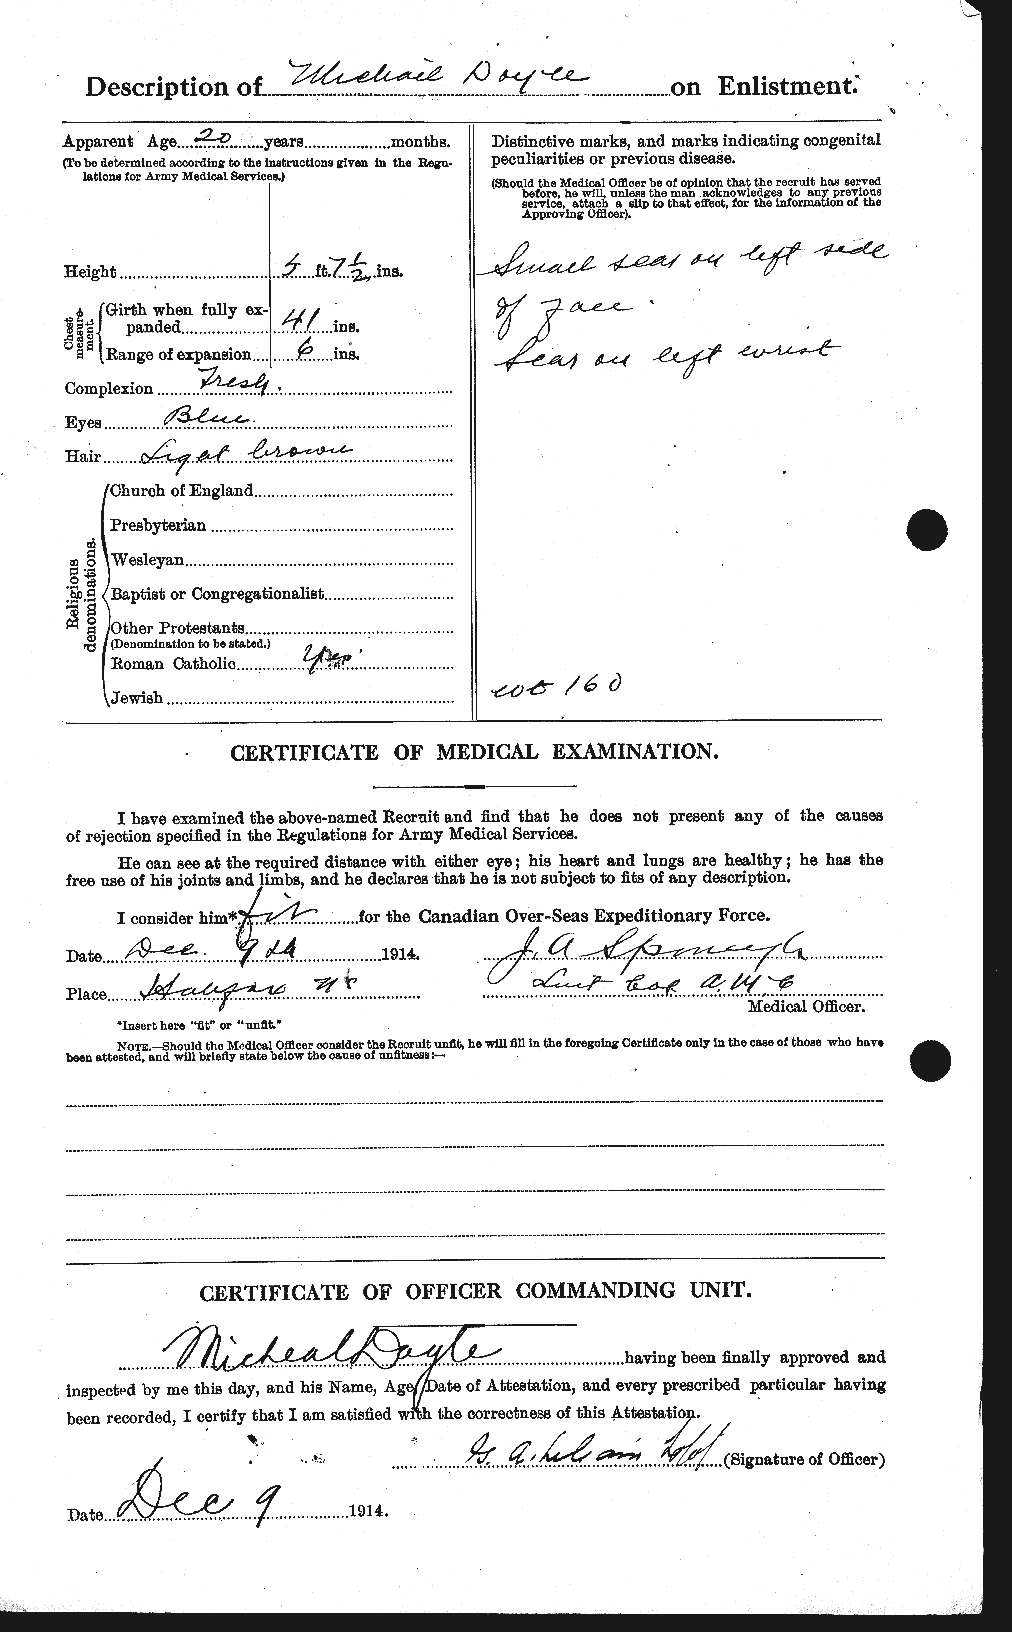 Personnel Records of the First World War - CEF 298646b